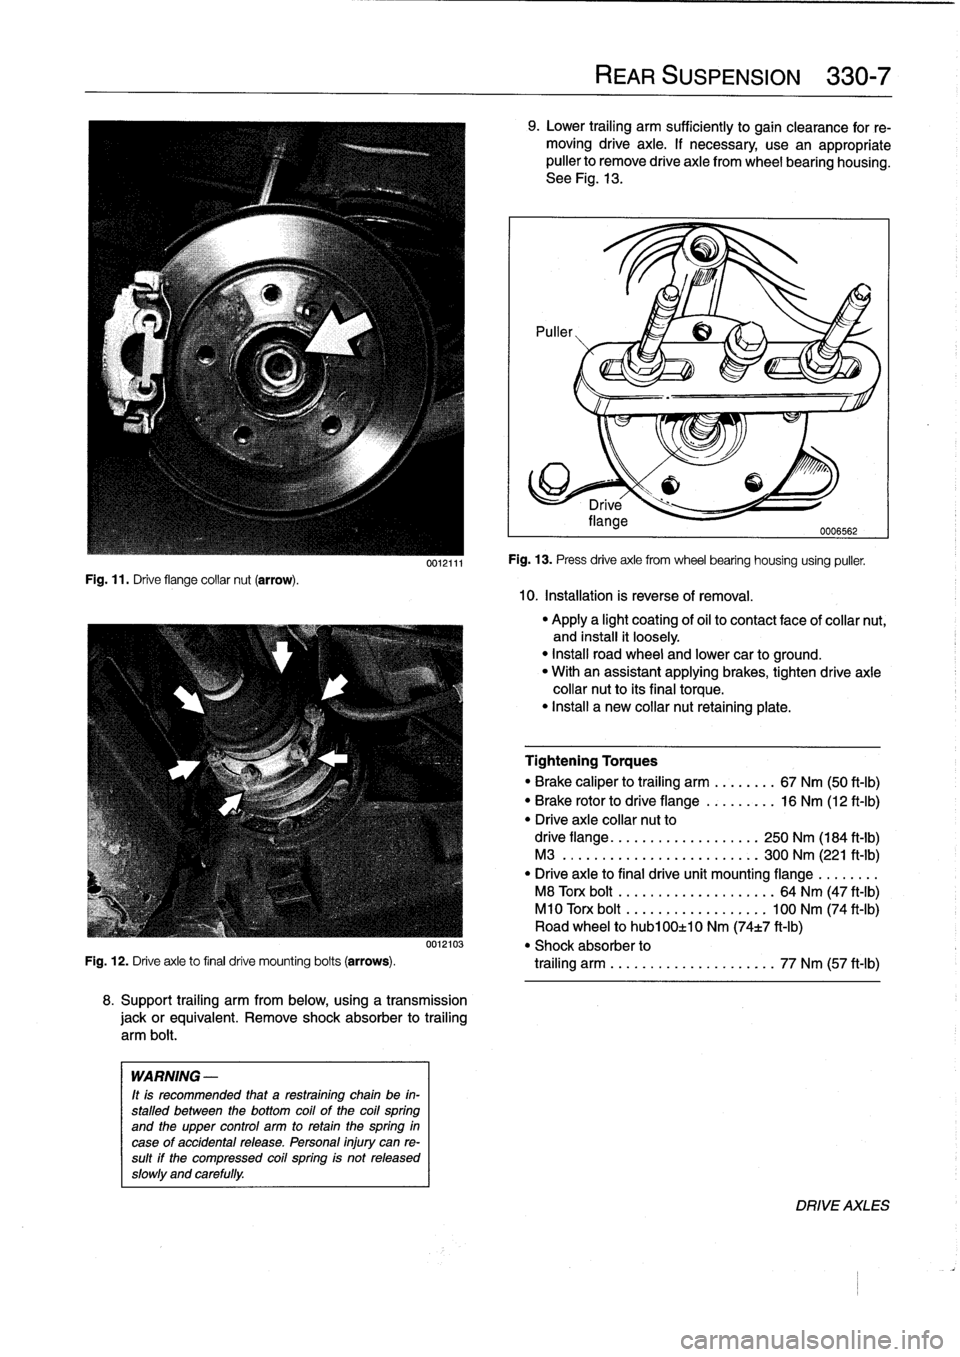 BMW 323i 1995 E36 Workshop Manual 
Fig
.
11
.
Drive
flange
collar
nut
(arrow)
.

0012111

8
.
Support
trailing
arm
from
below,
using
a
transmission

jackorequivalent
.
Remove
shock
absorber
to
trailing

arm
bolt
.

WARNING
-

It
is
re